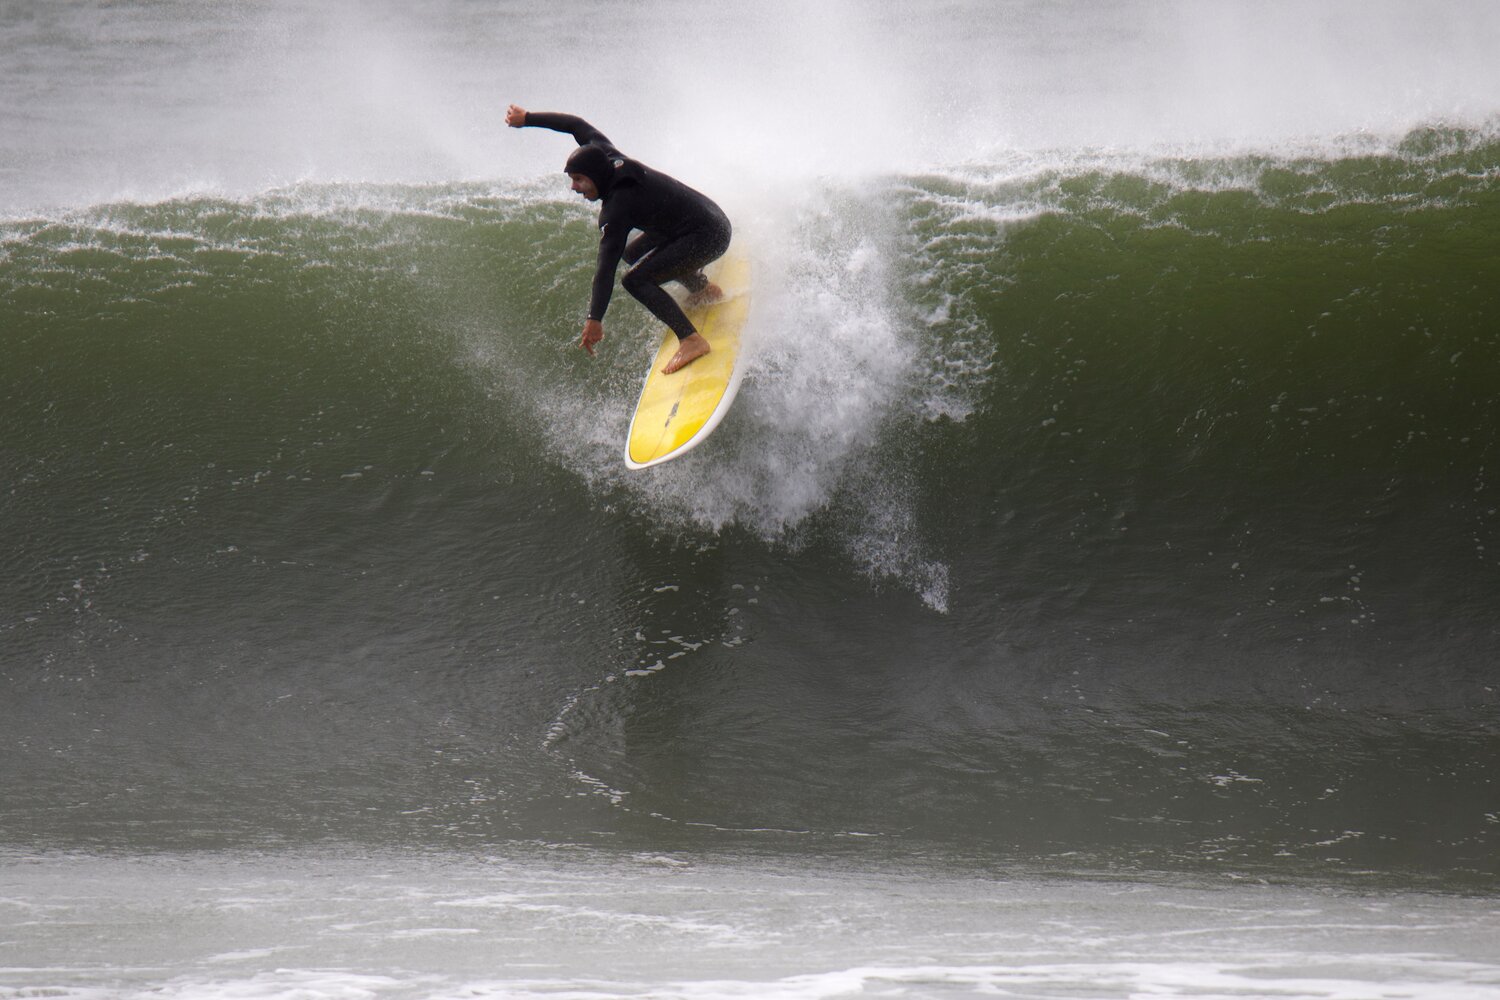 A surfer catches a wave in Maddequecham Friday.